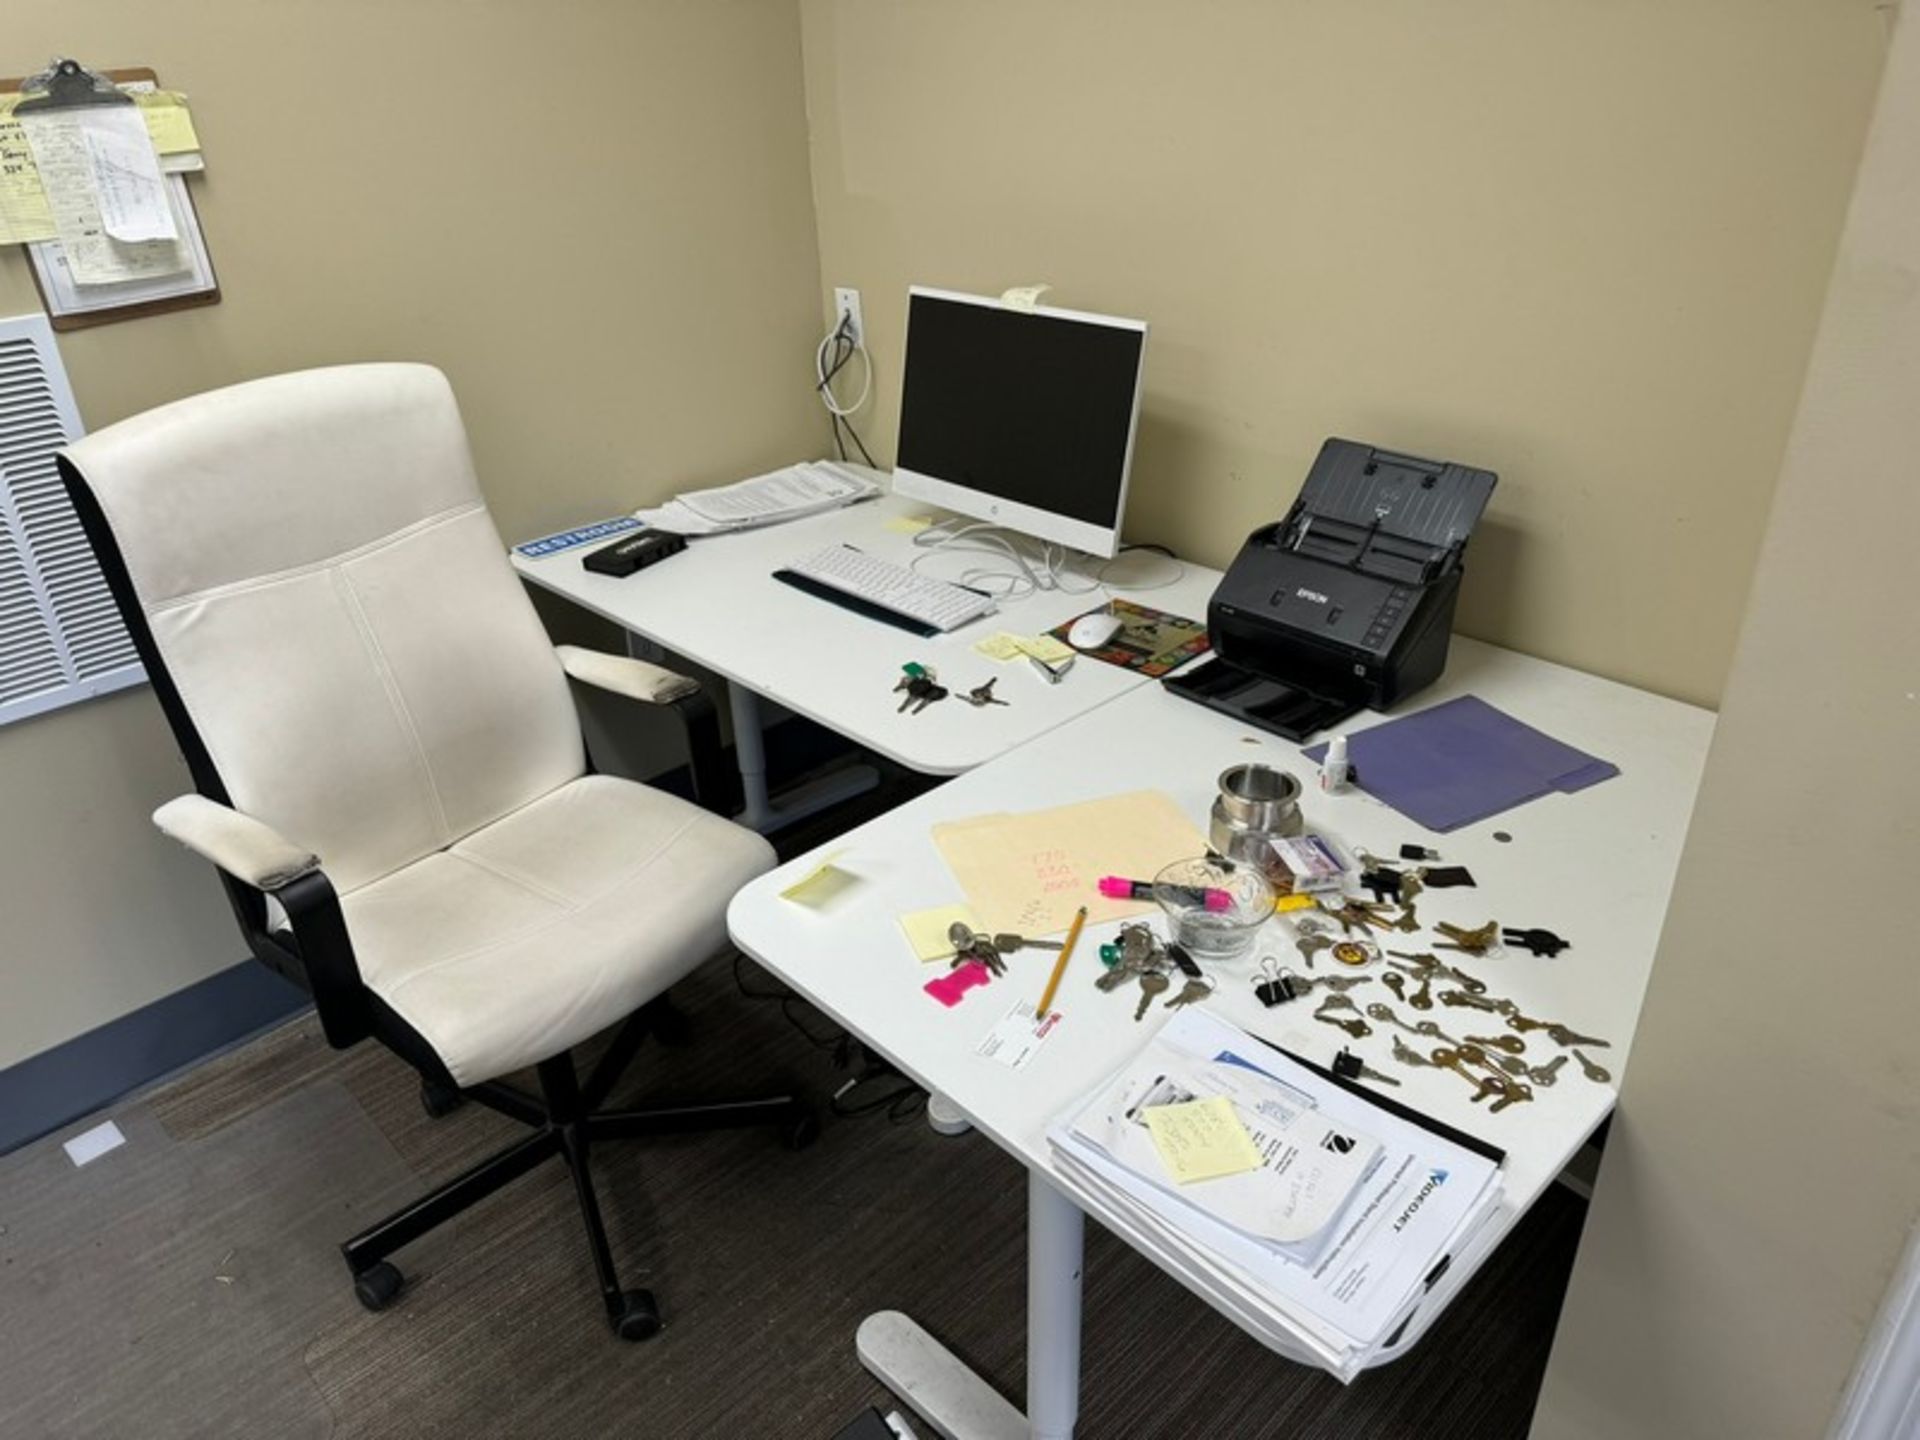 Contents of Office Area